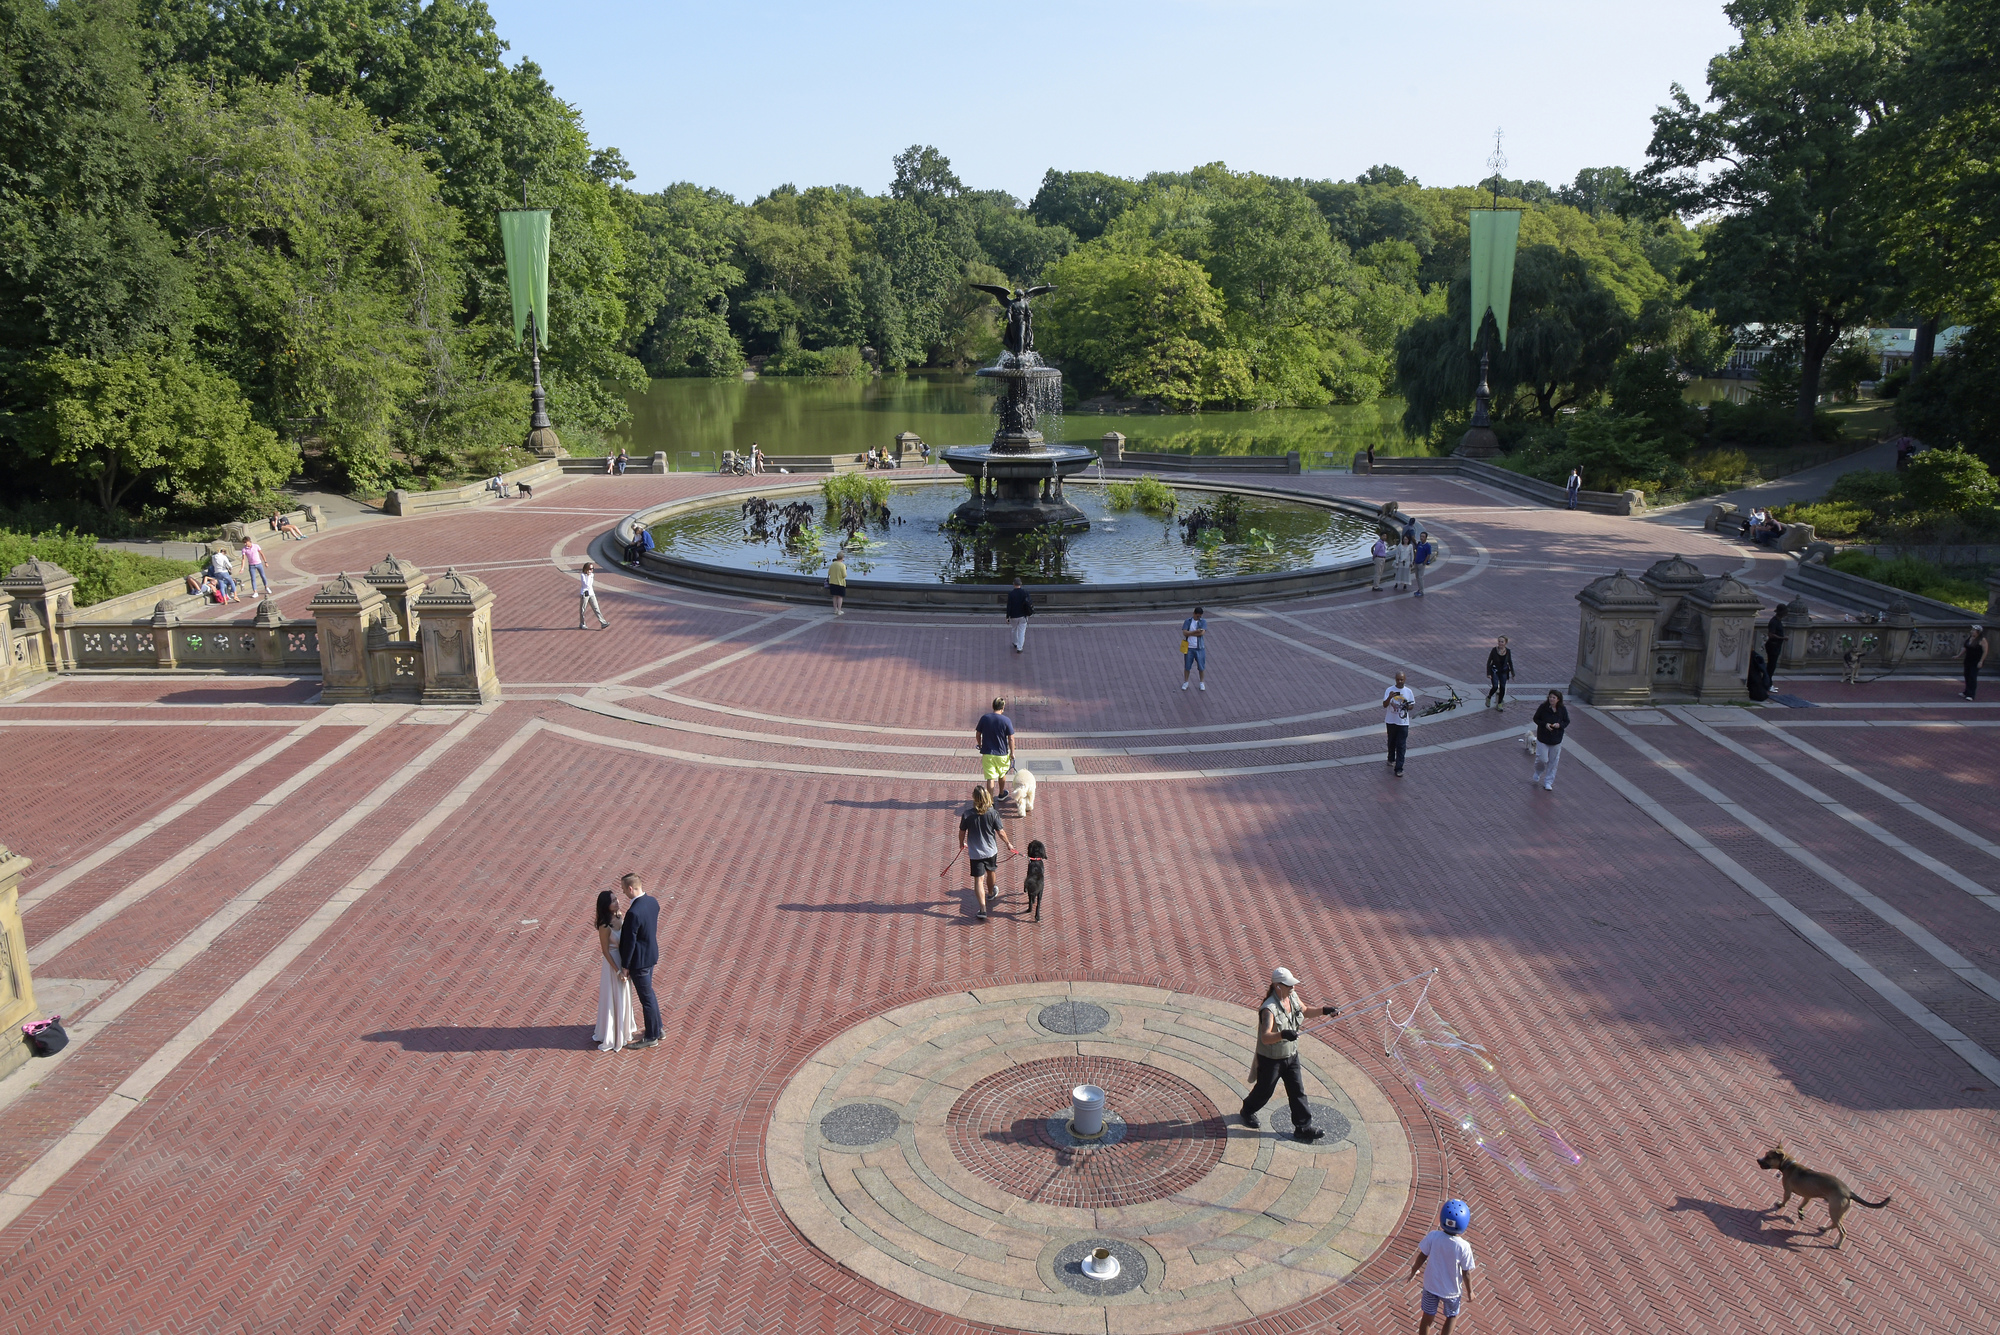 Up Close with Bethesda Terrace and Fountain in NYC